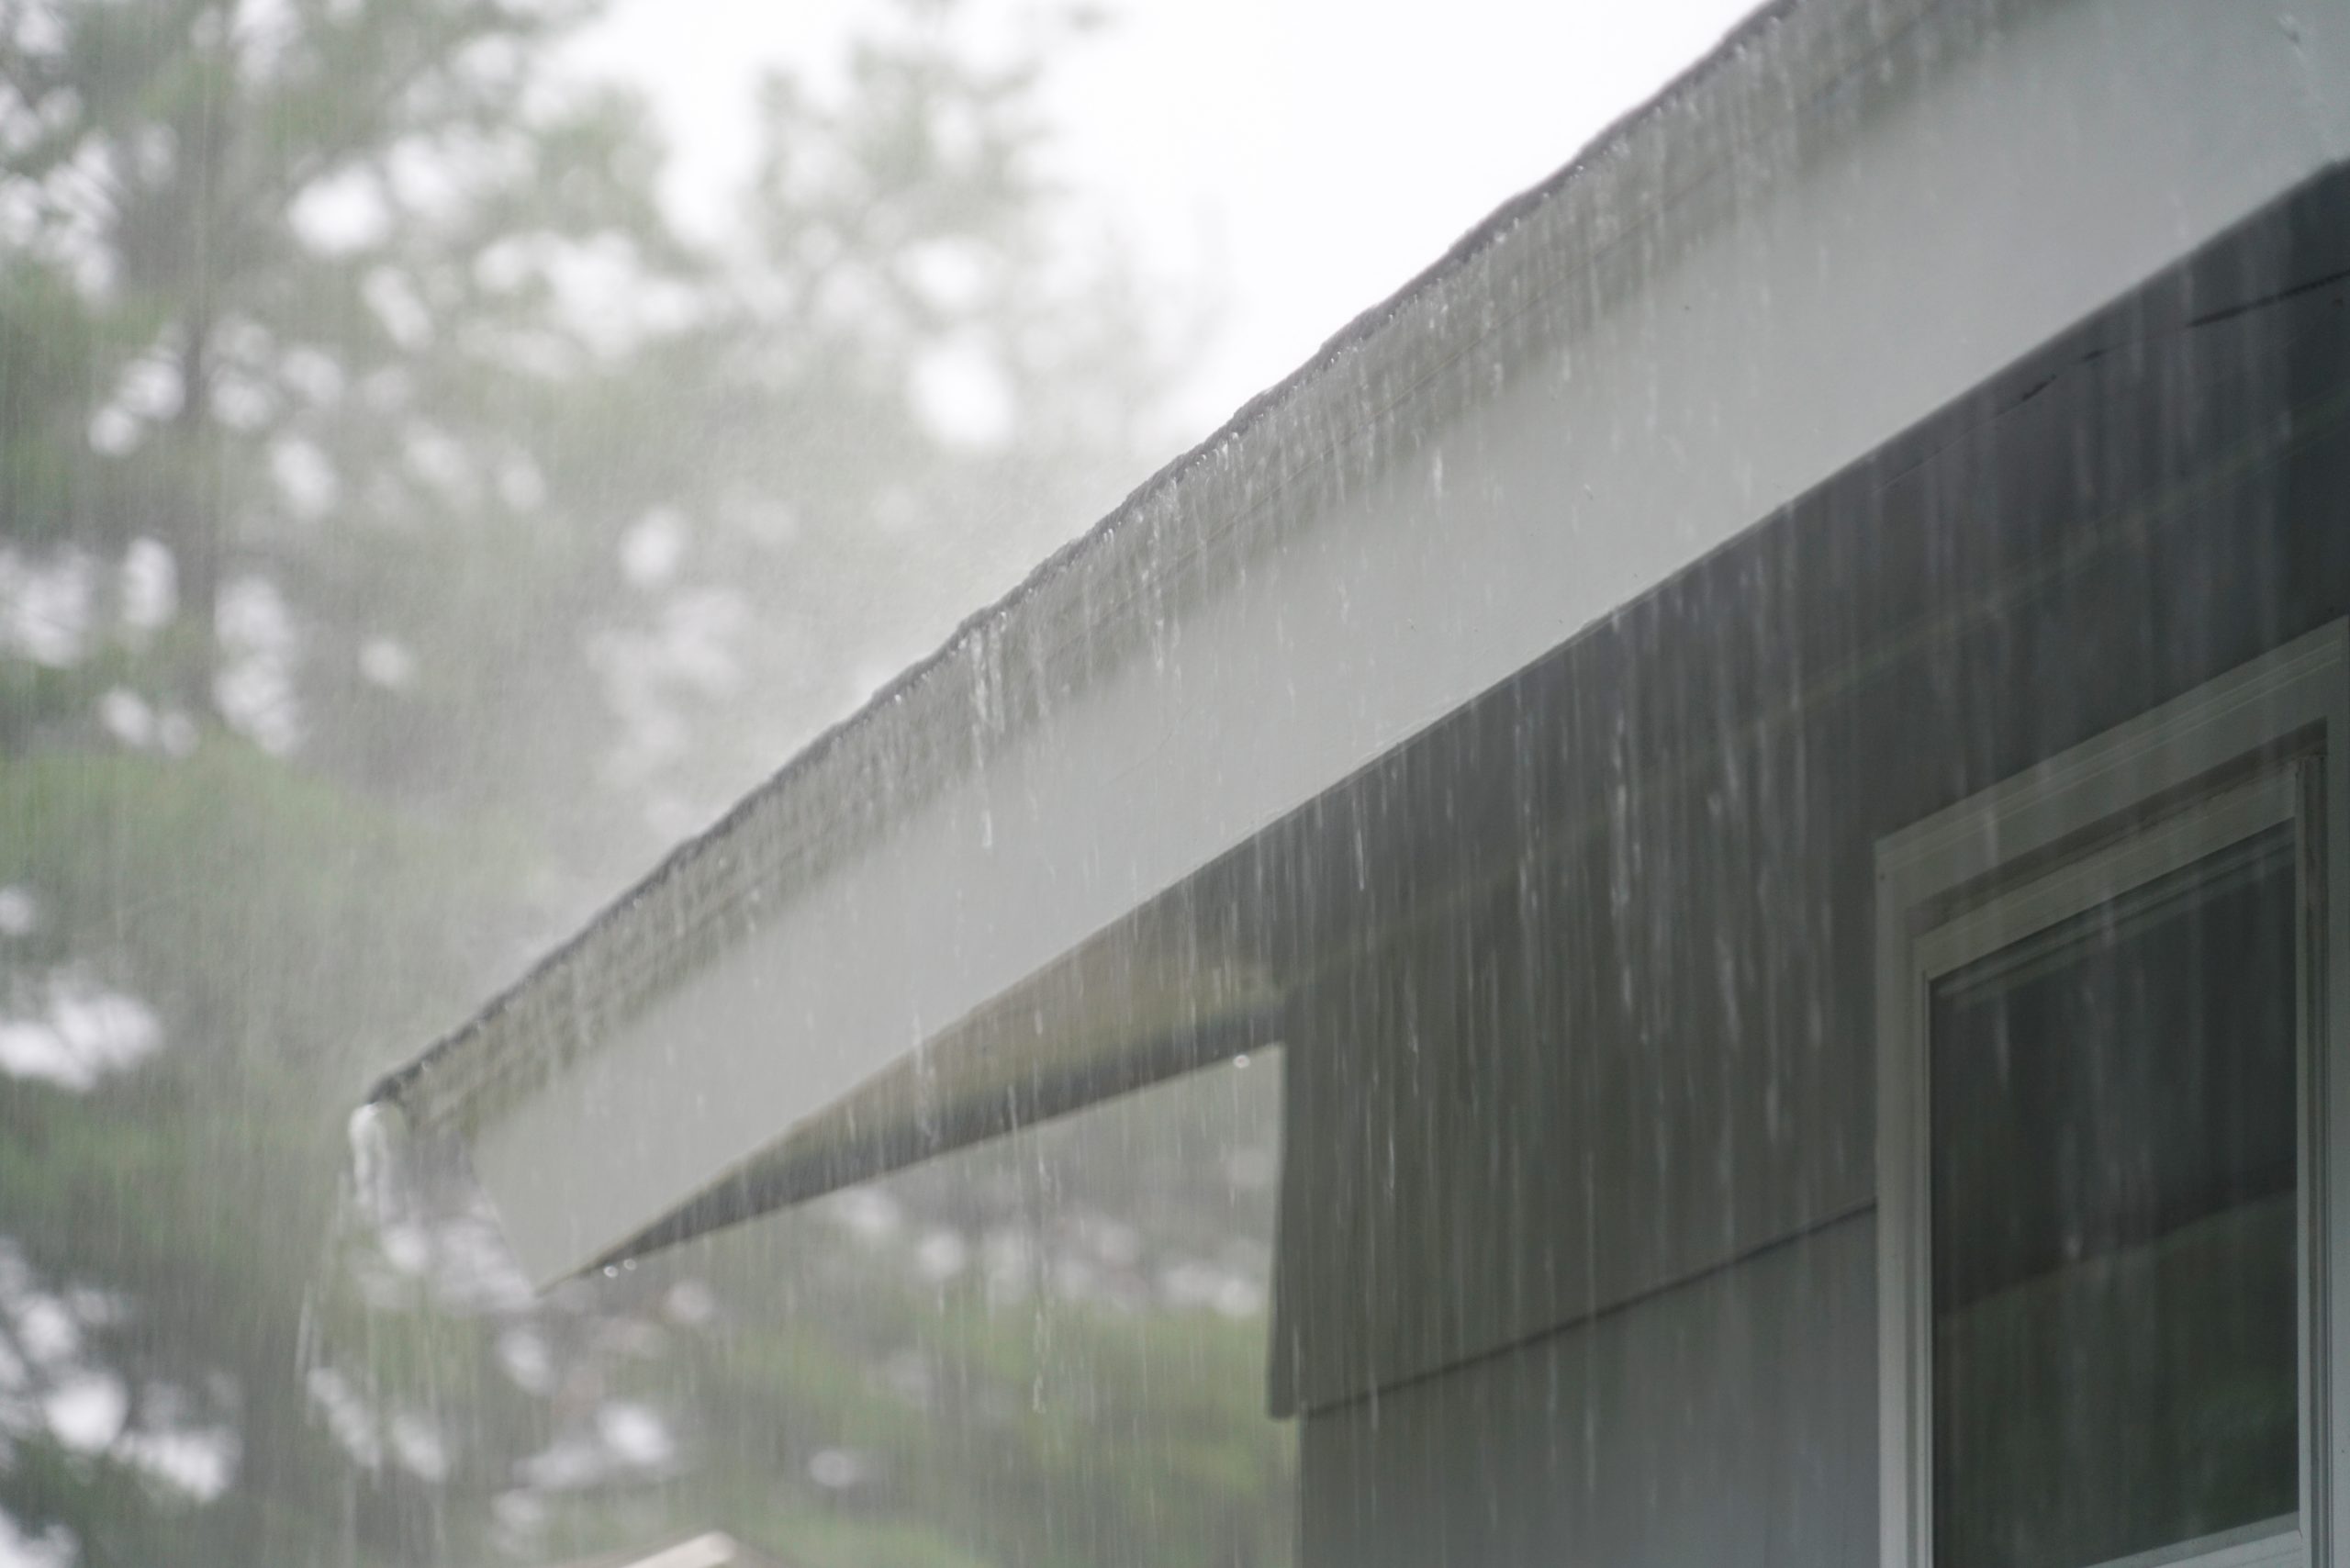 Close up of asphalt shingle roof in heavy downpour